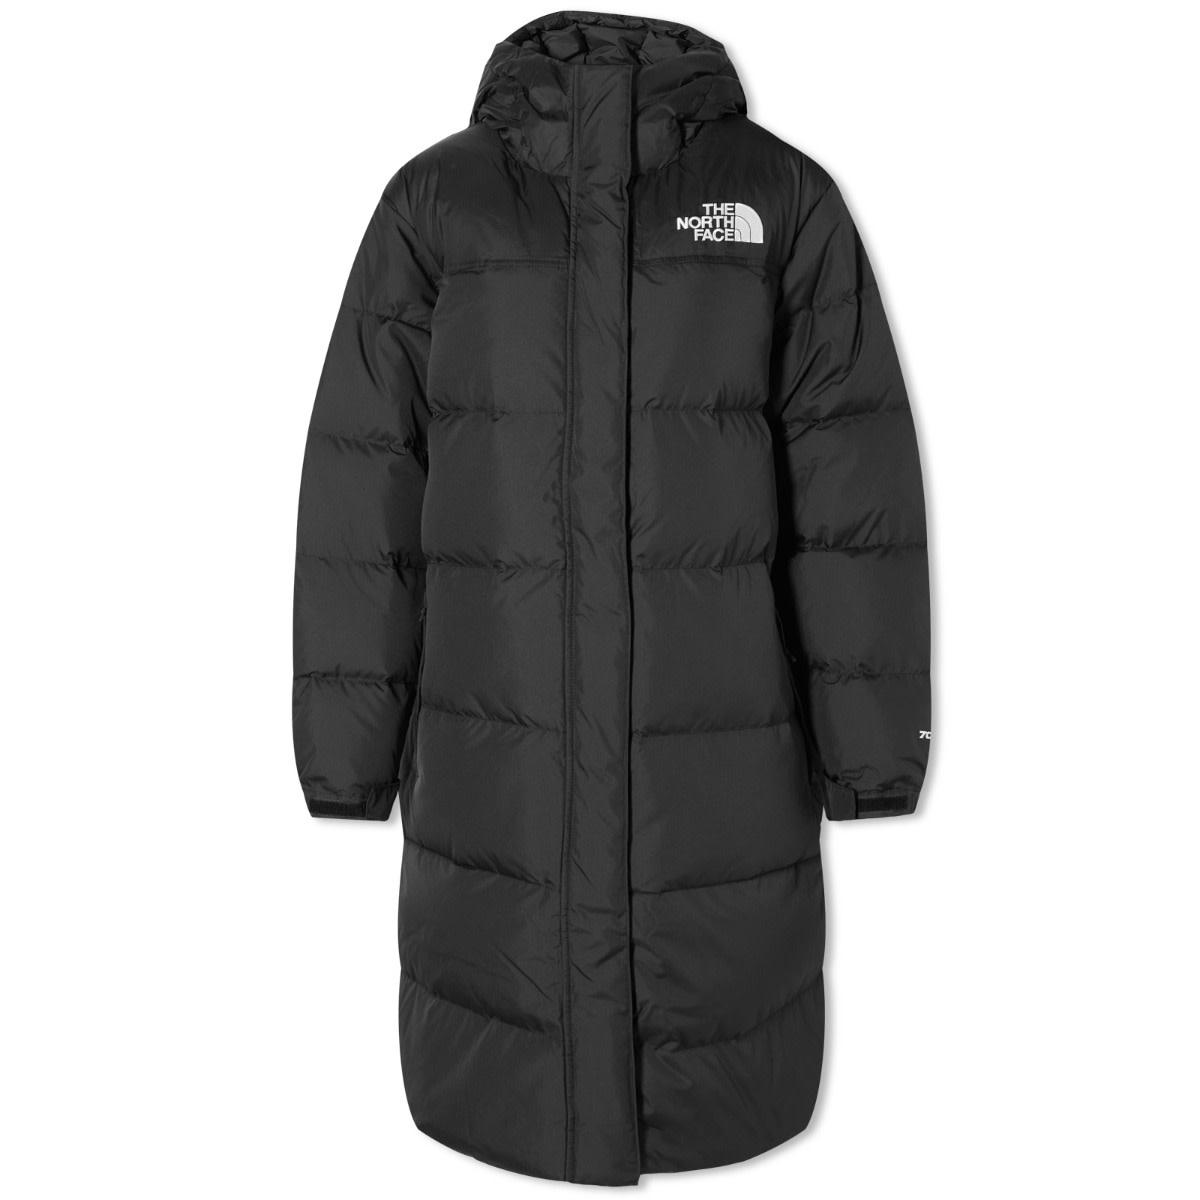 The North Face Nuptse Long Puffer Parka Jacket in Black | Lyst UK